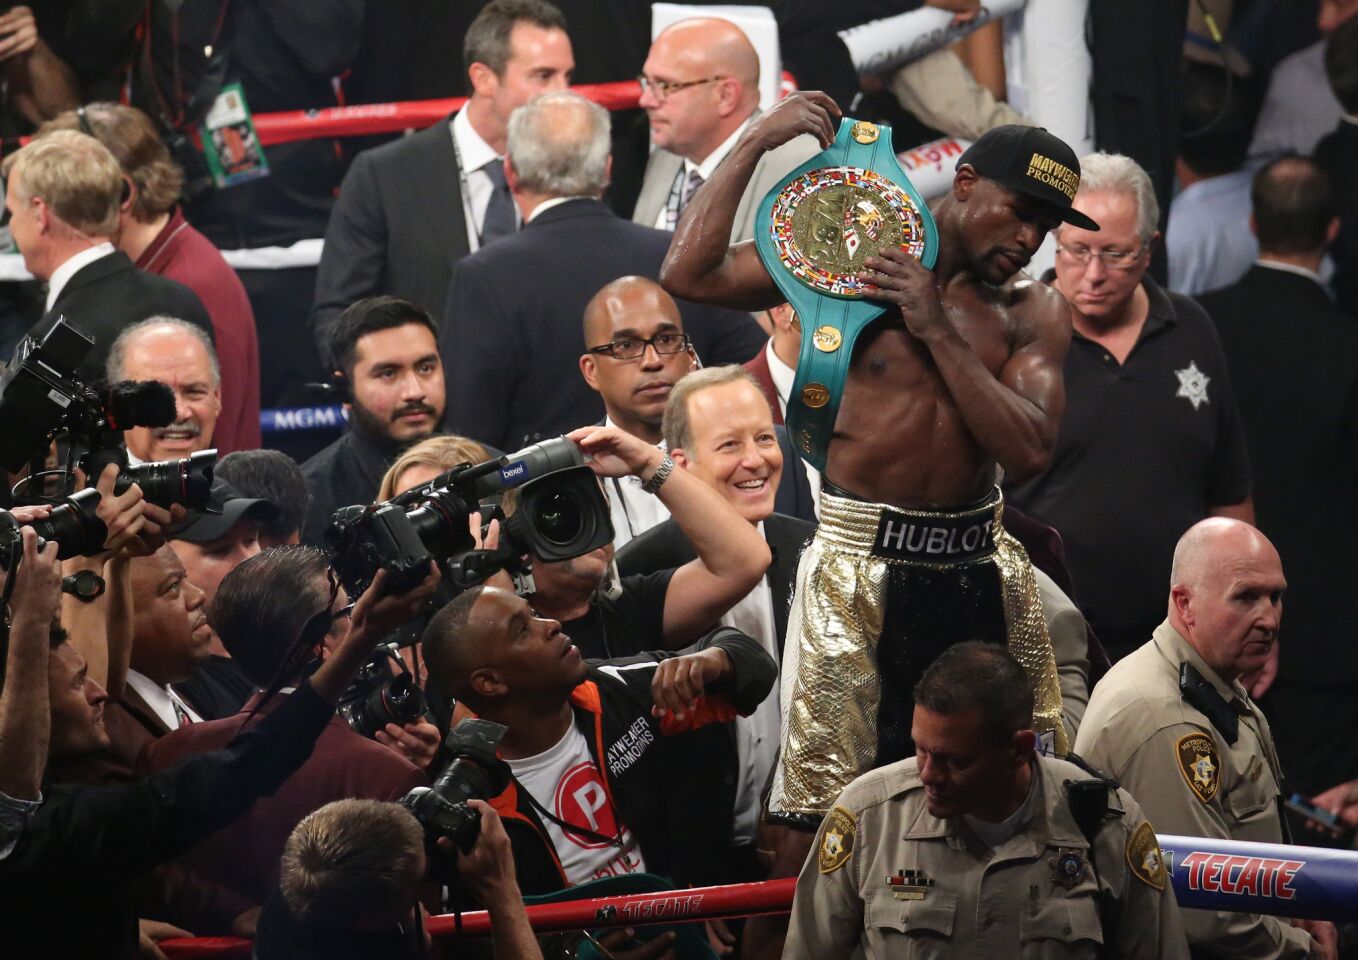 Floyd Mayweather Jr. holds up the belt after defeating Manny Pacquiao for the WBC welterweight championship Saturday at the MGM Grand Garden Arena.